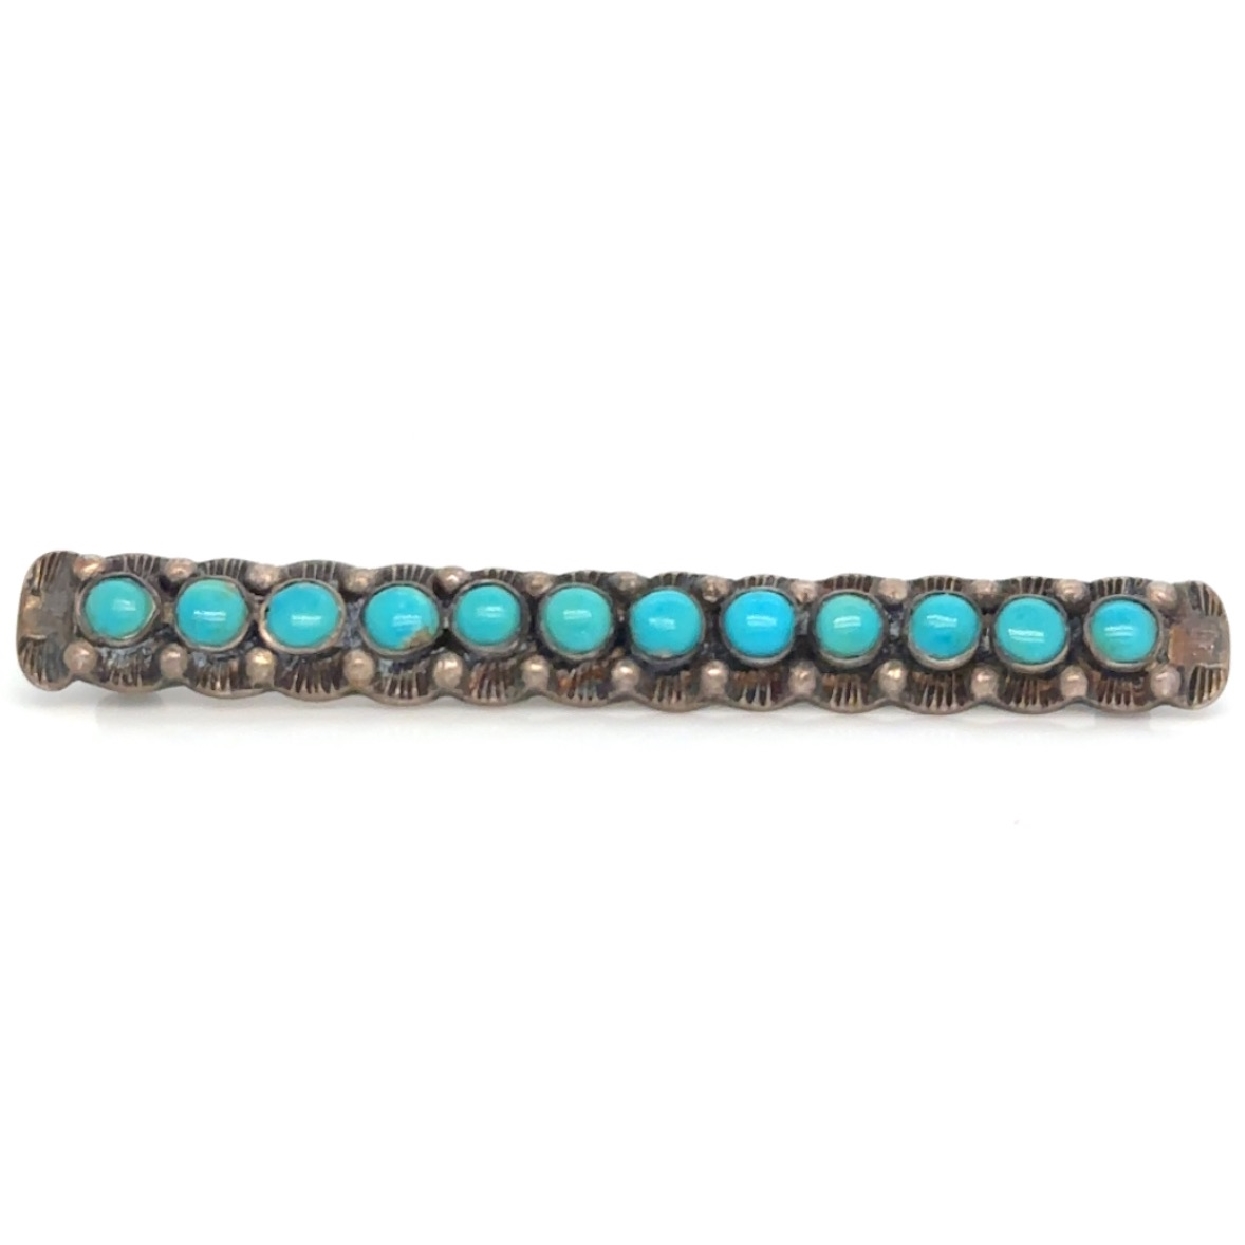 Vintage Sterling Silver Round Turquoise Cabochon Bar Pin

